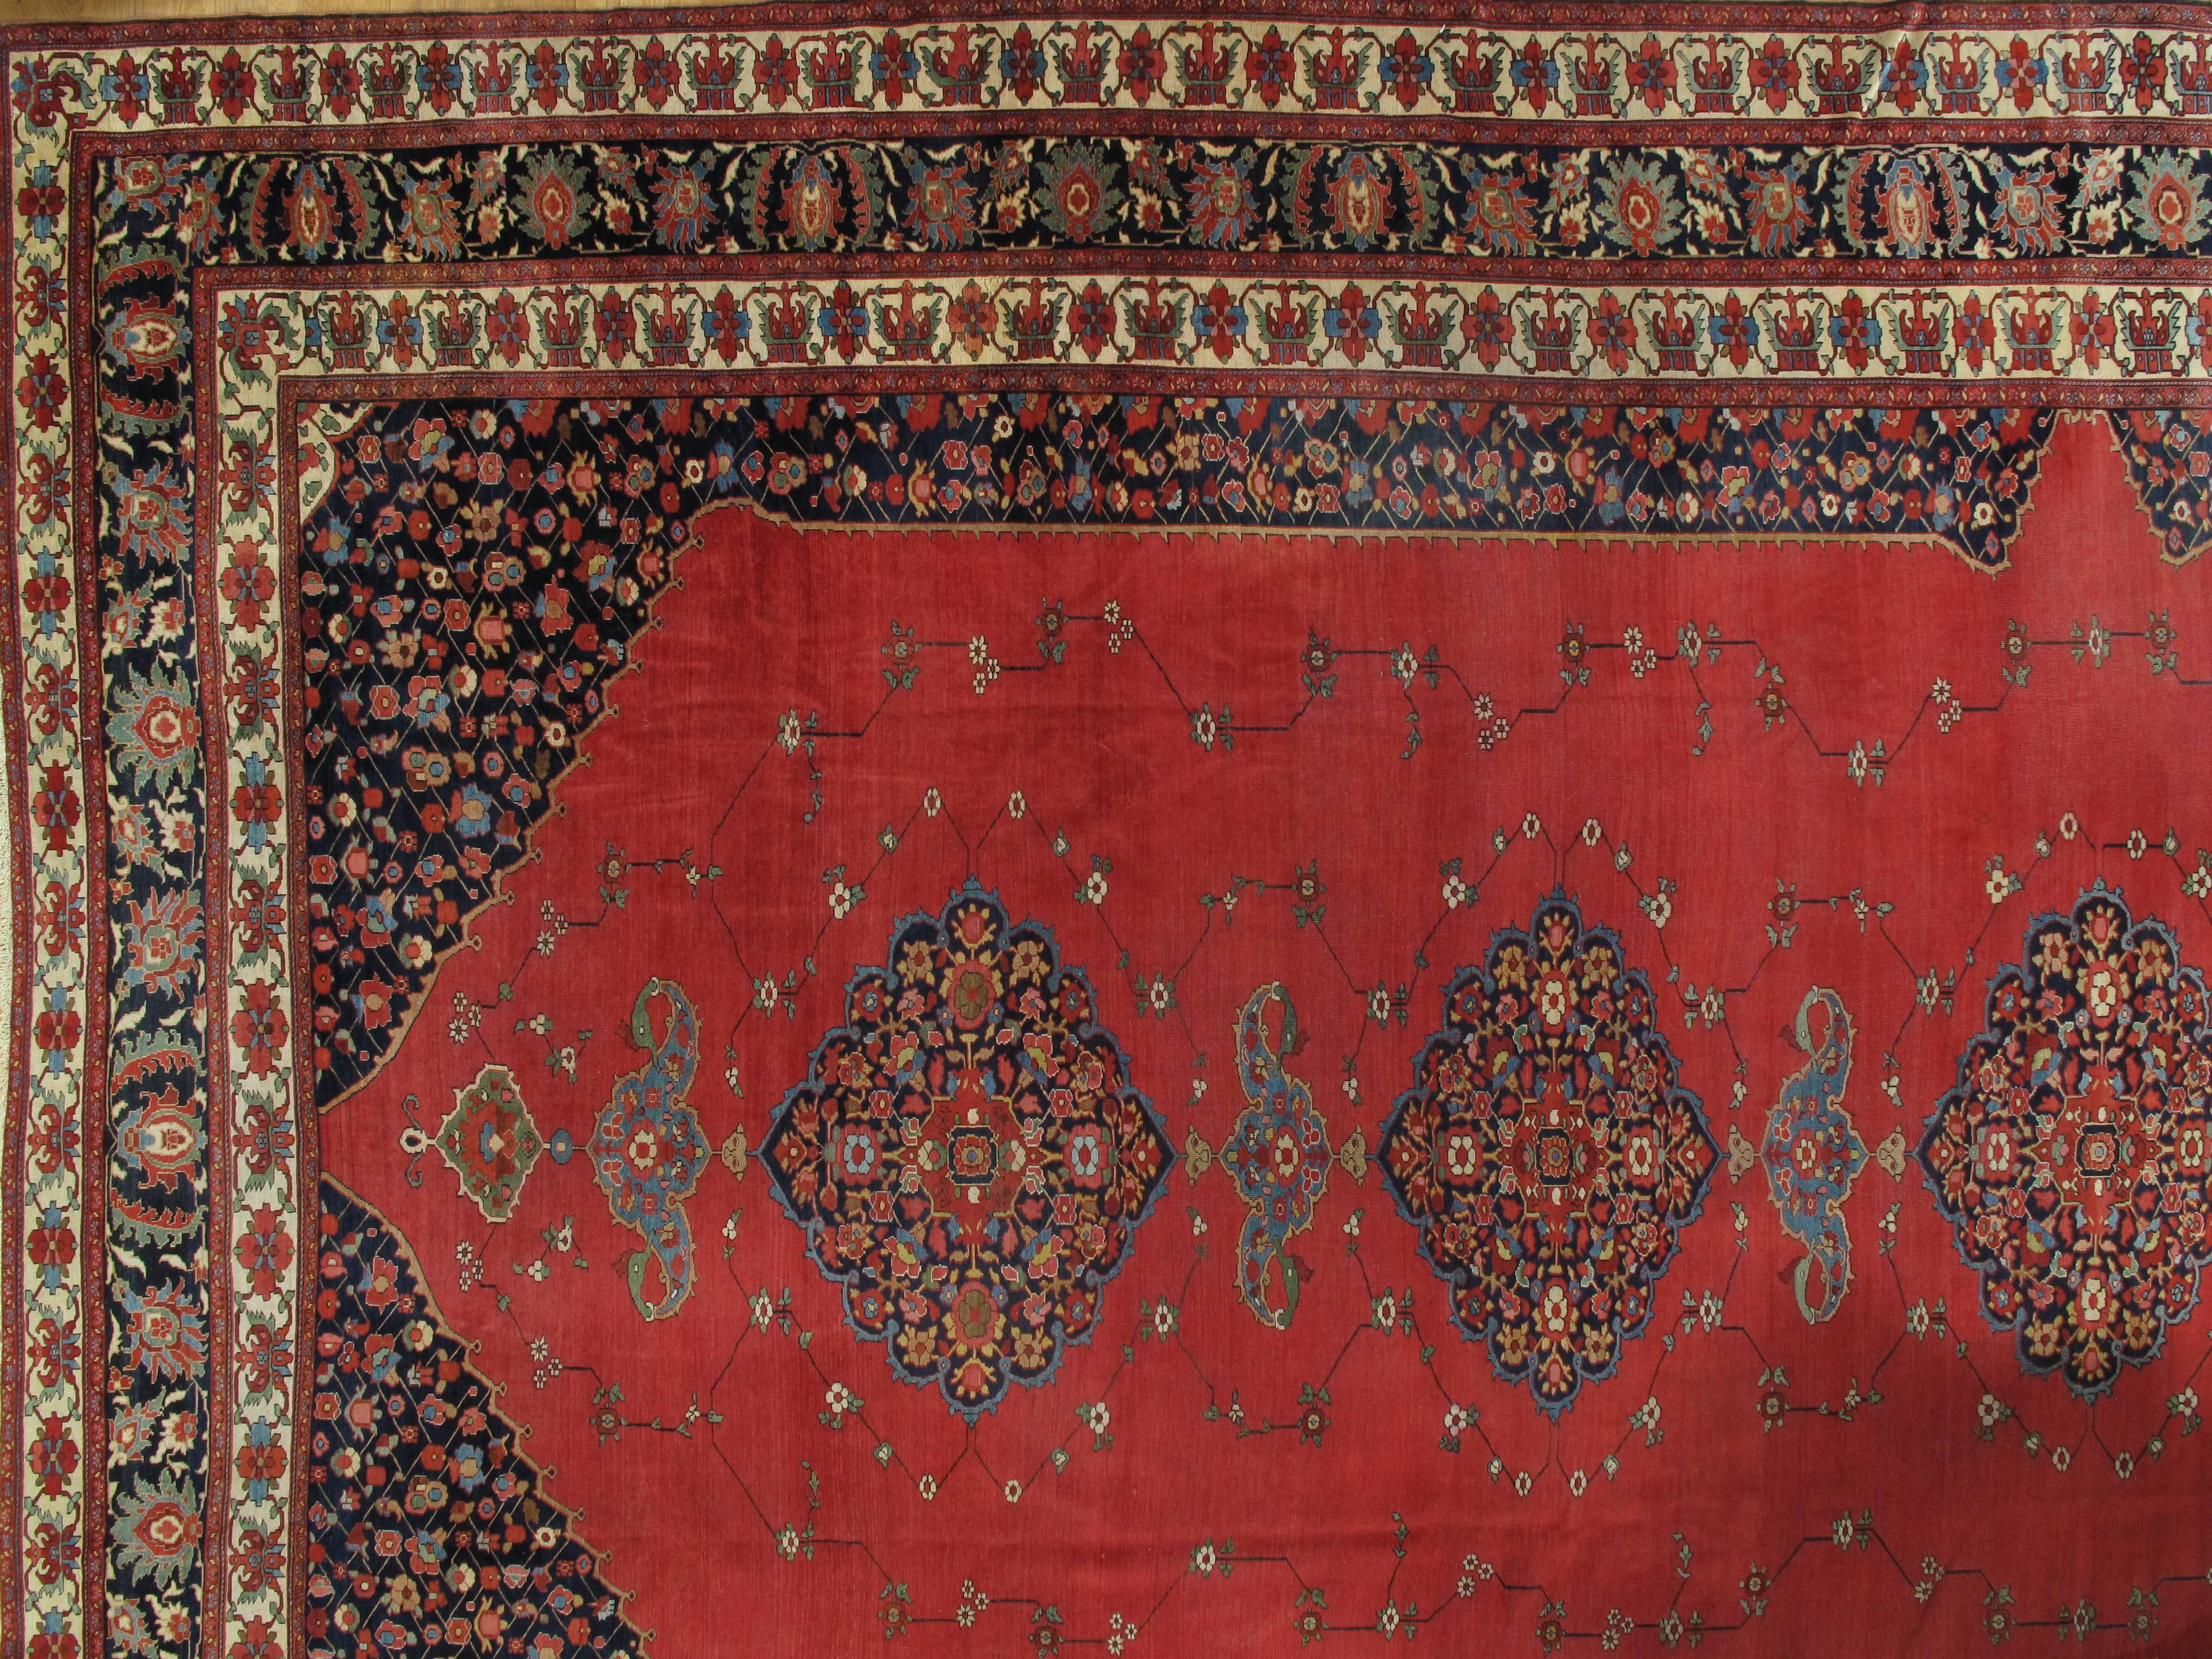 Antique Farahan Sarouk Carpet, Handmade Oriental Rug, Ivory, Navy, Red In Good Condition For Sale In Port Washington, NY